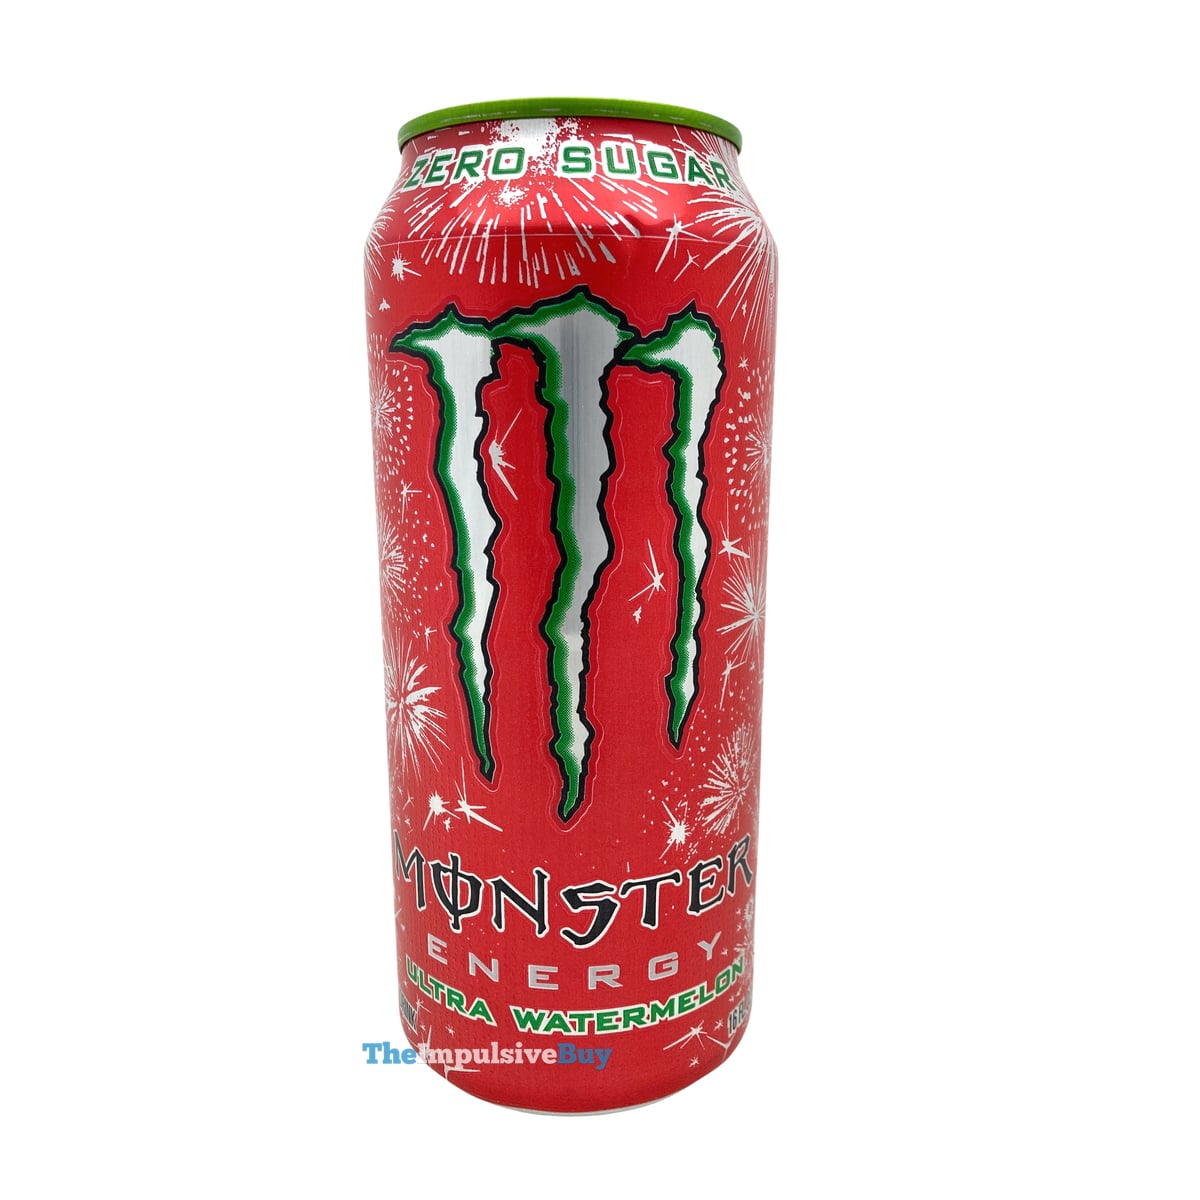 Palads tilskuer område REVIEW: Monster Energy Ultra Watermelon - The Impulsive Buy